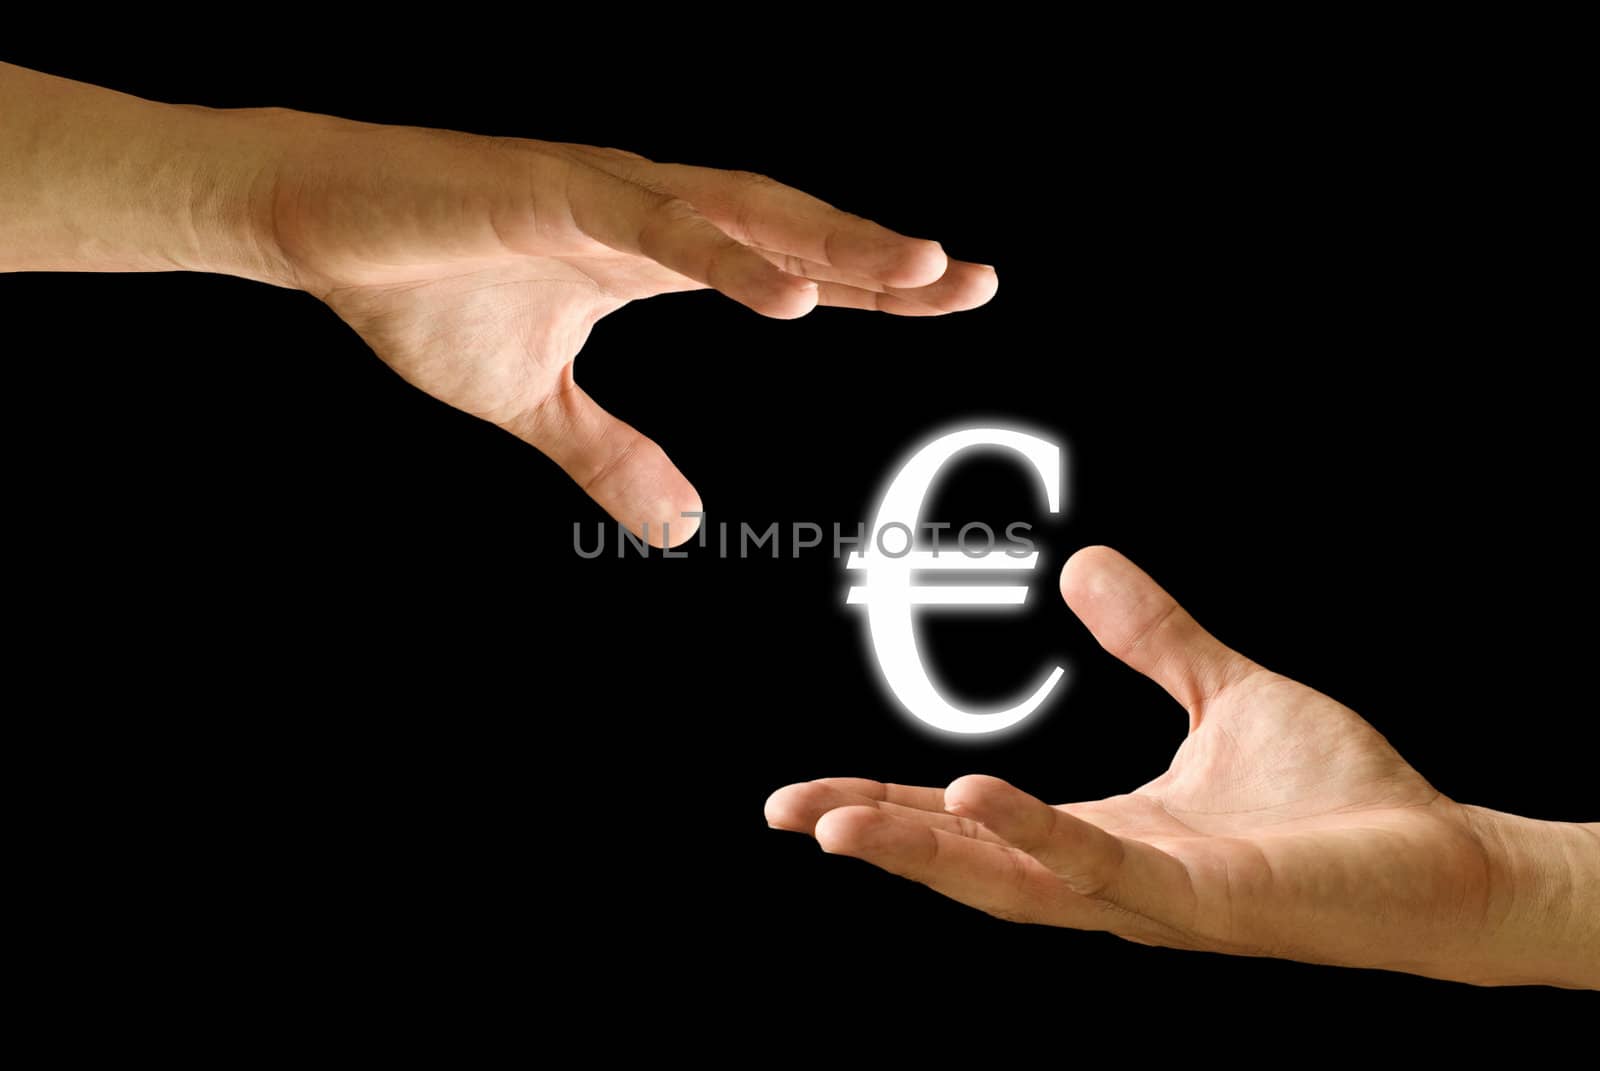 Seller hand take the Euro icon from the buyer hand by pixbox77